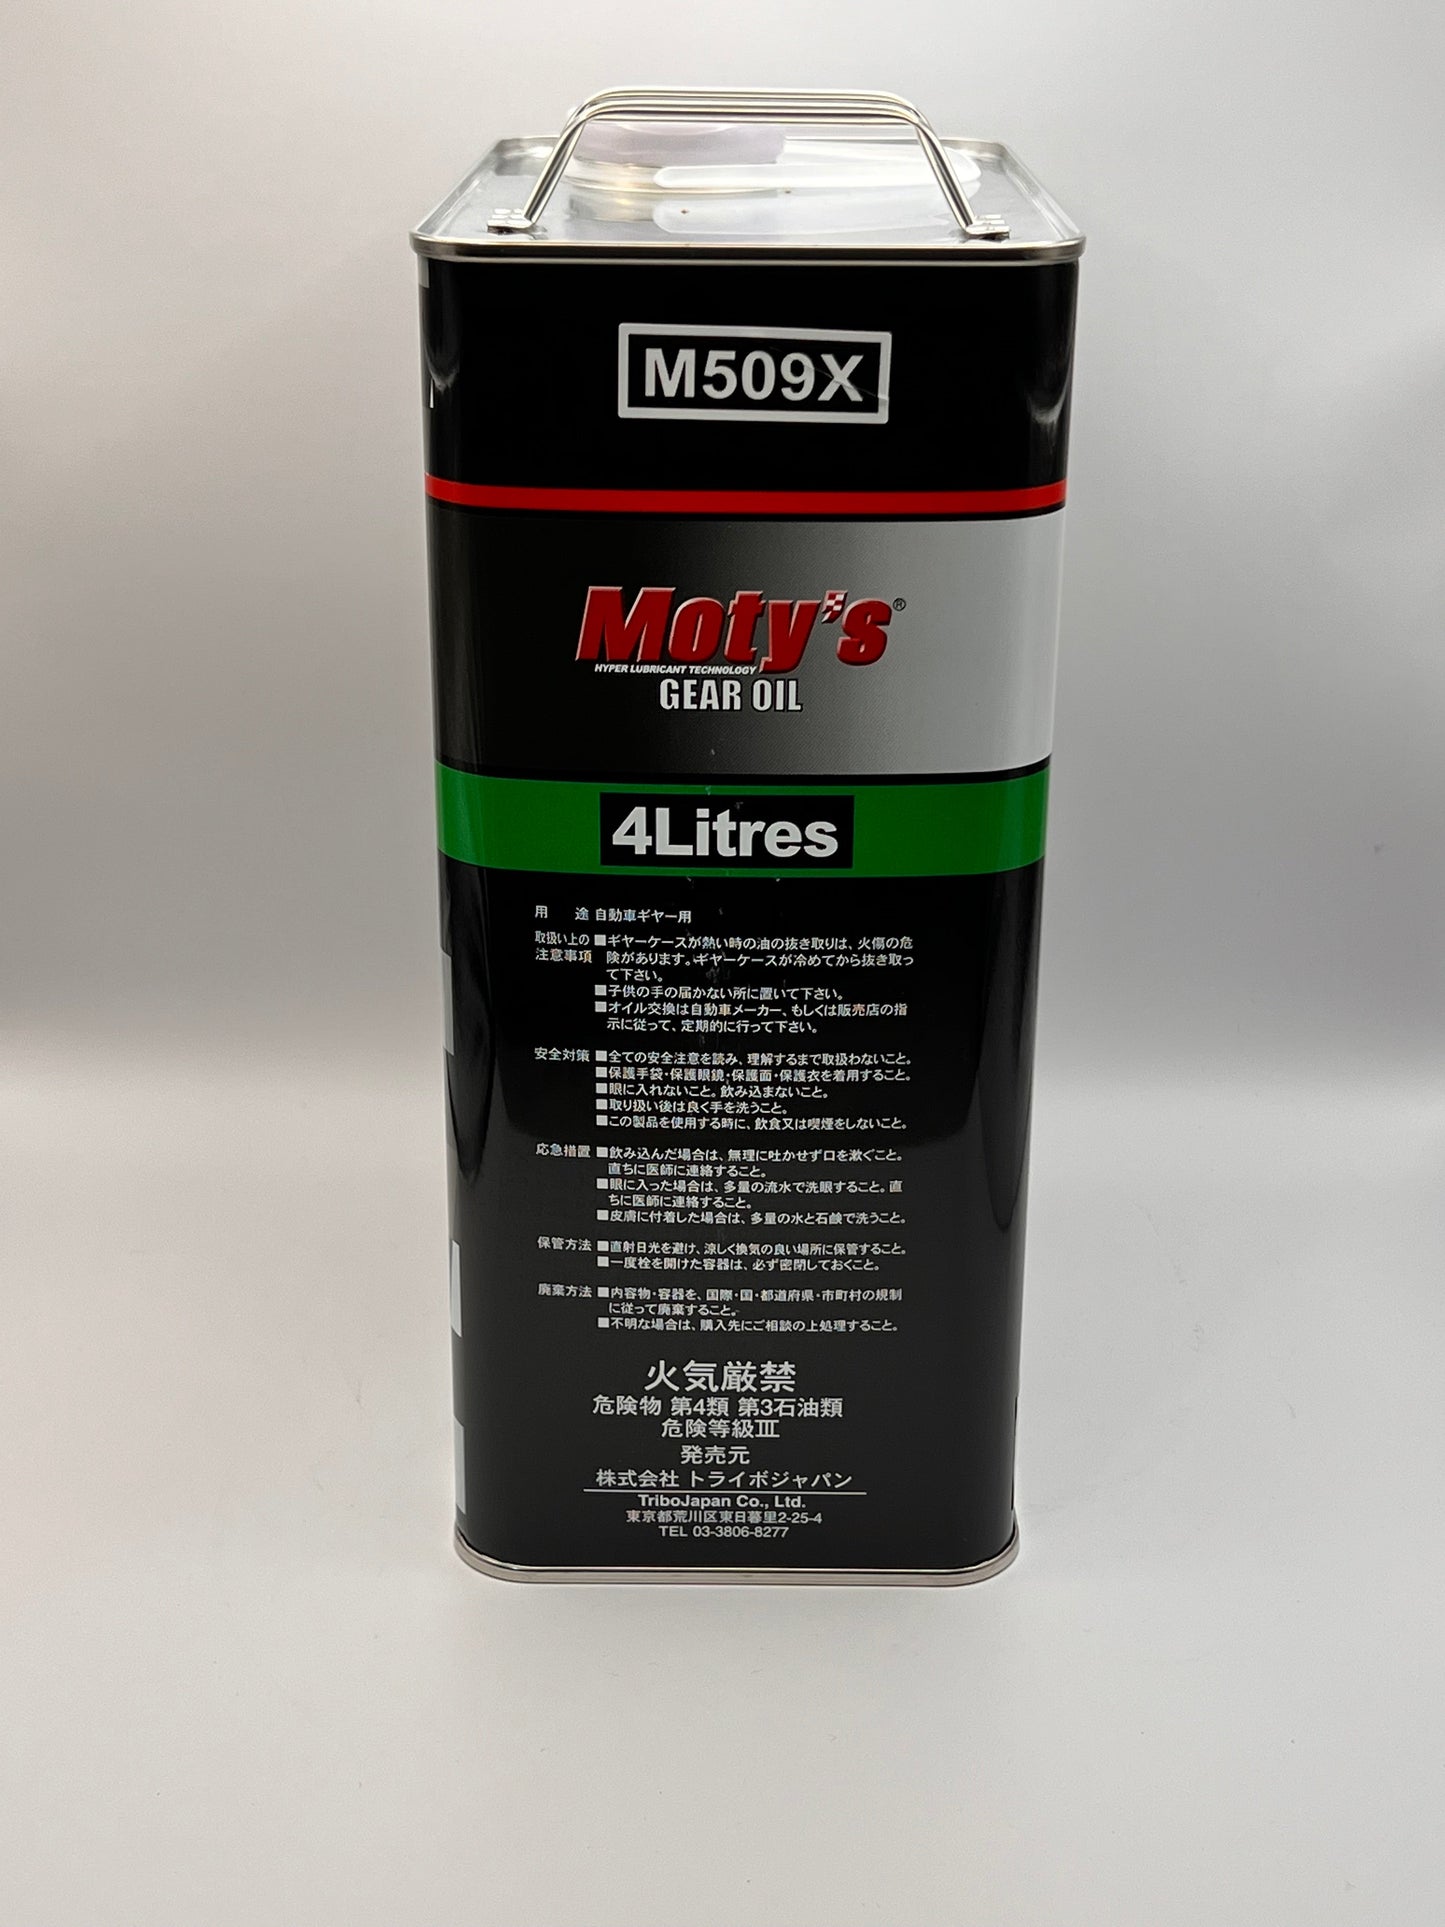 Moty's Gear Oil Specialized Mineral Oil M509X140 4 Litres